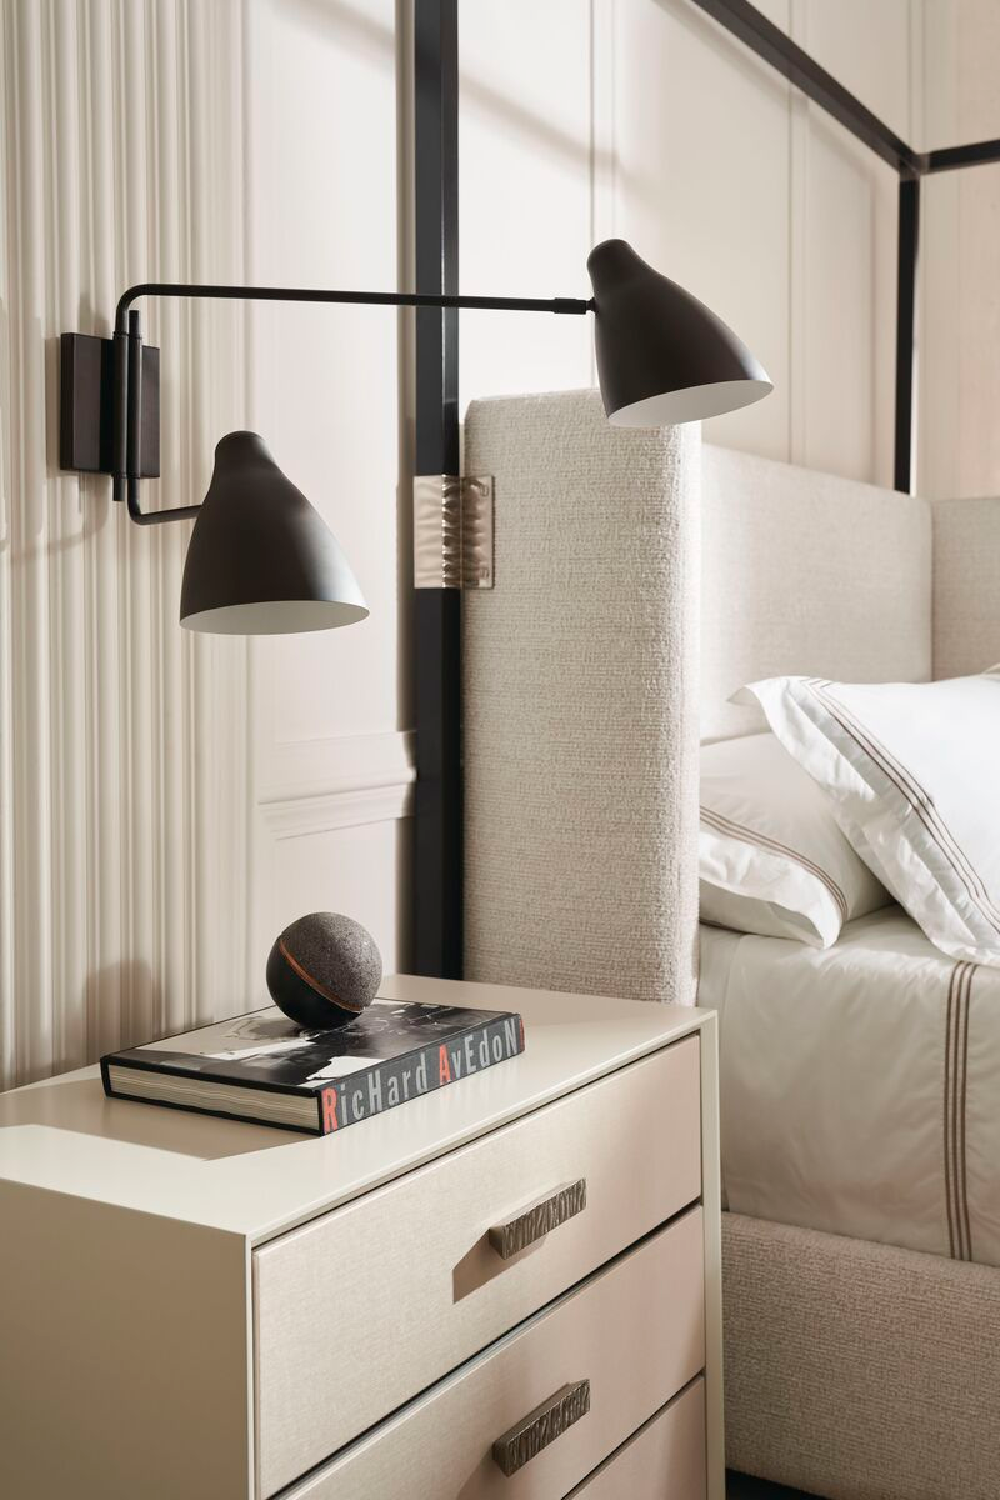 Vinyl 3-Drawer Nightstand | Caracole Silver Lining | Oroa.com